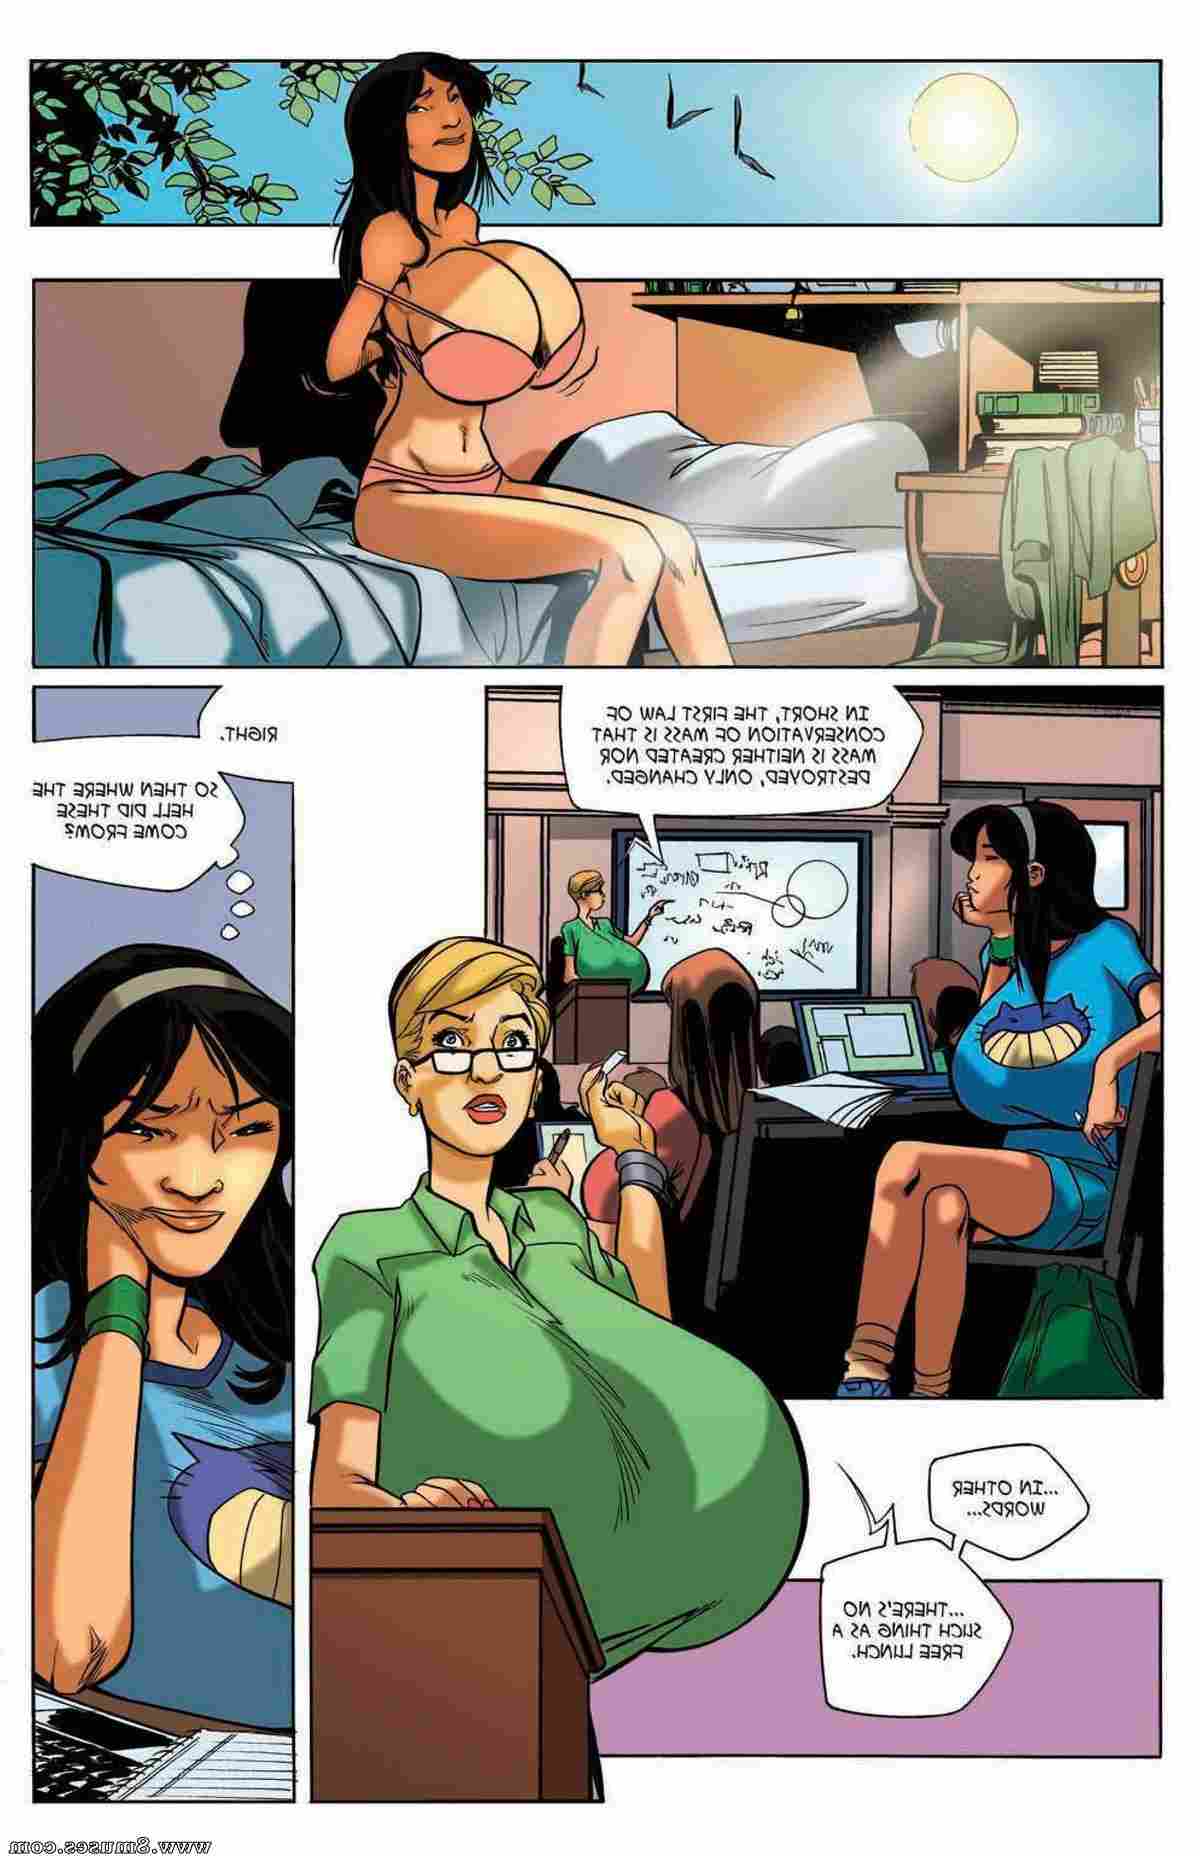 BE-Story-Club-Comics/Welcome-to-Chastity Welcome_to_Chastity__8muses_-_Sex_and_Porn_Comics_33.jpg